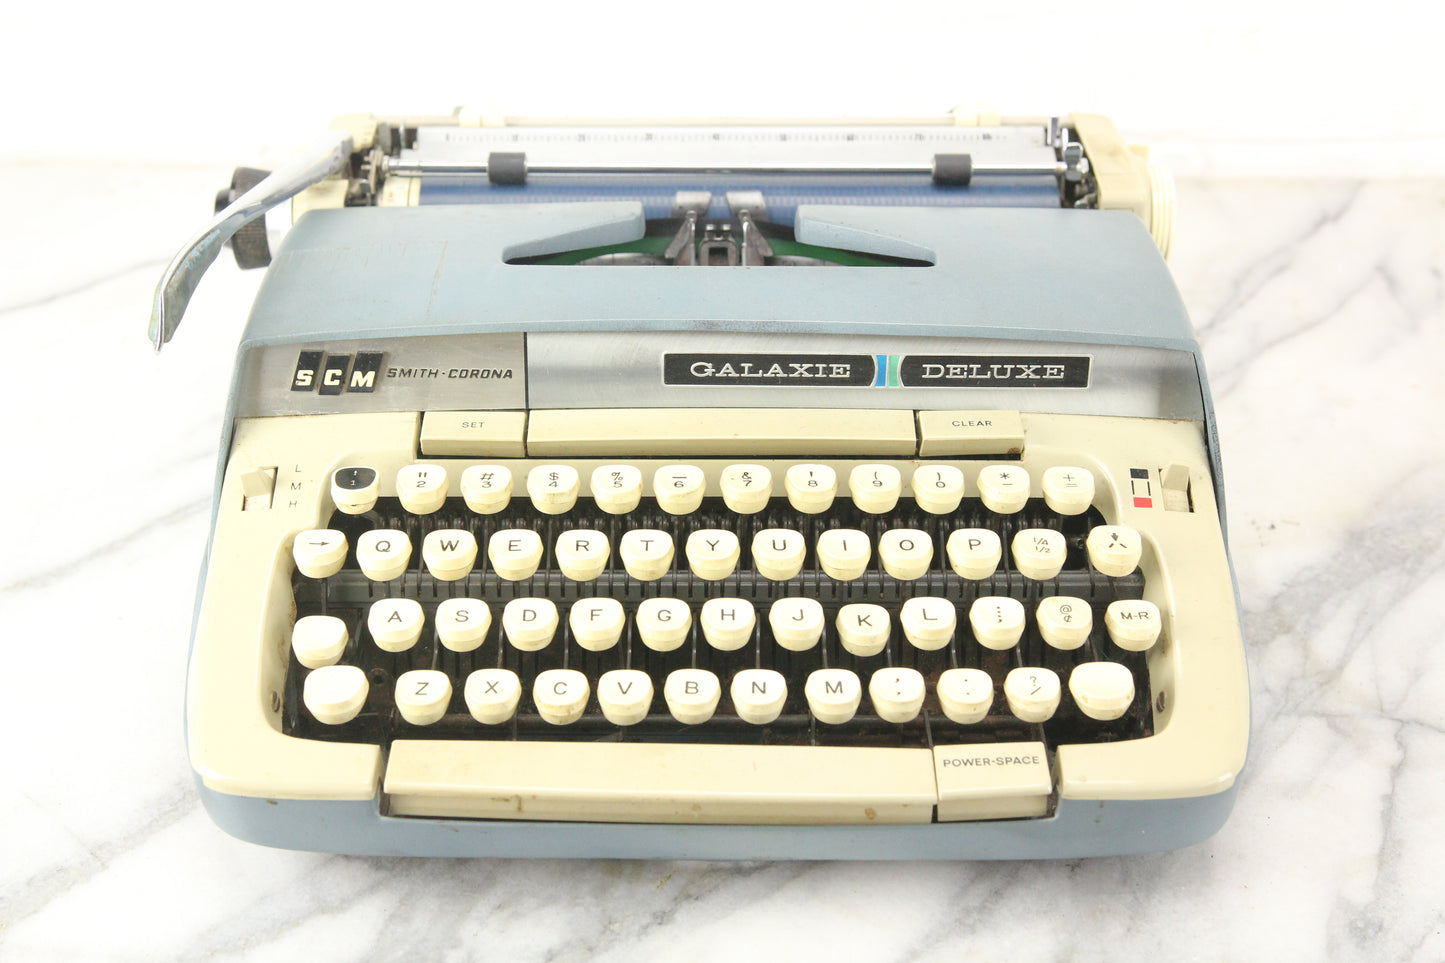 Smith-Corona Galaxie Deluxe Portable Typewriter with Case, 1960s